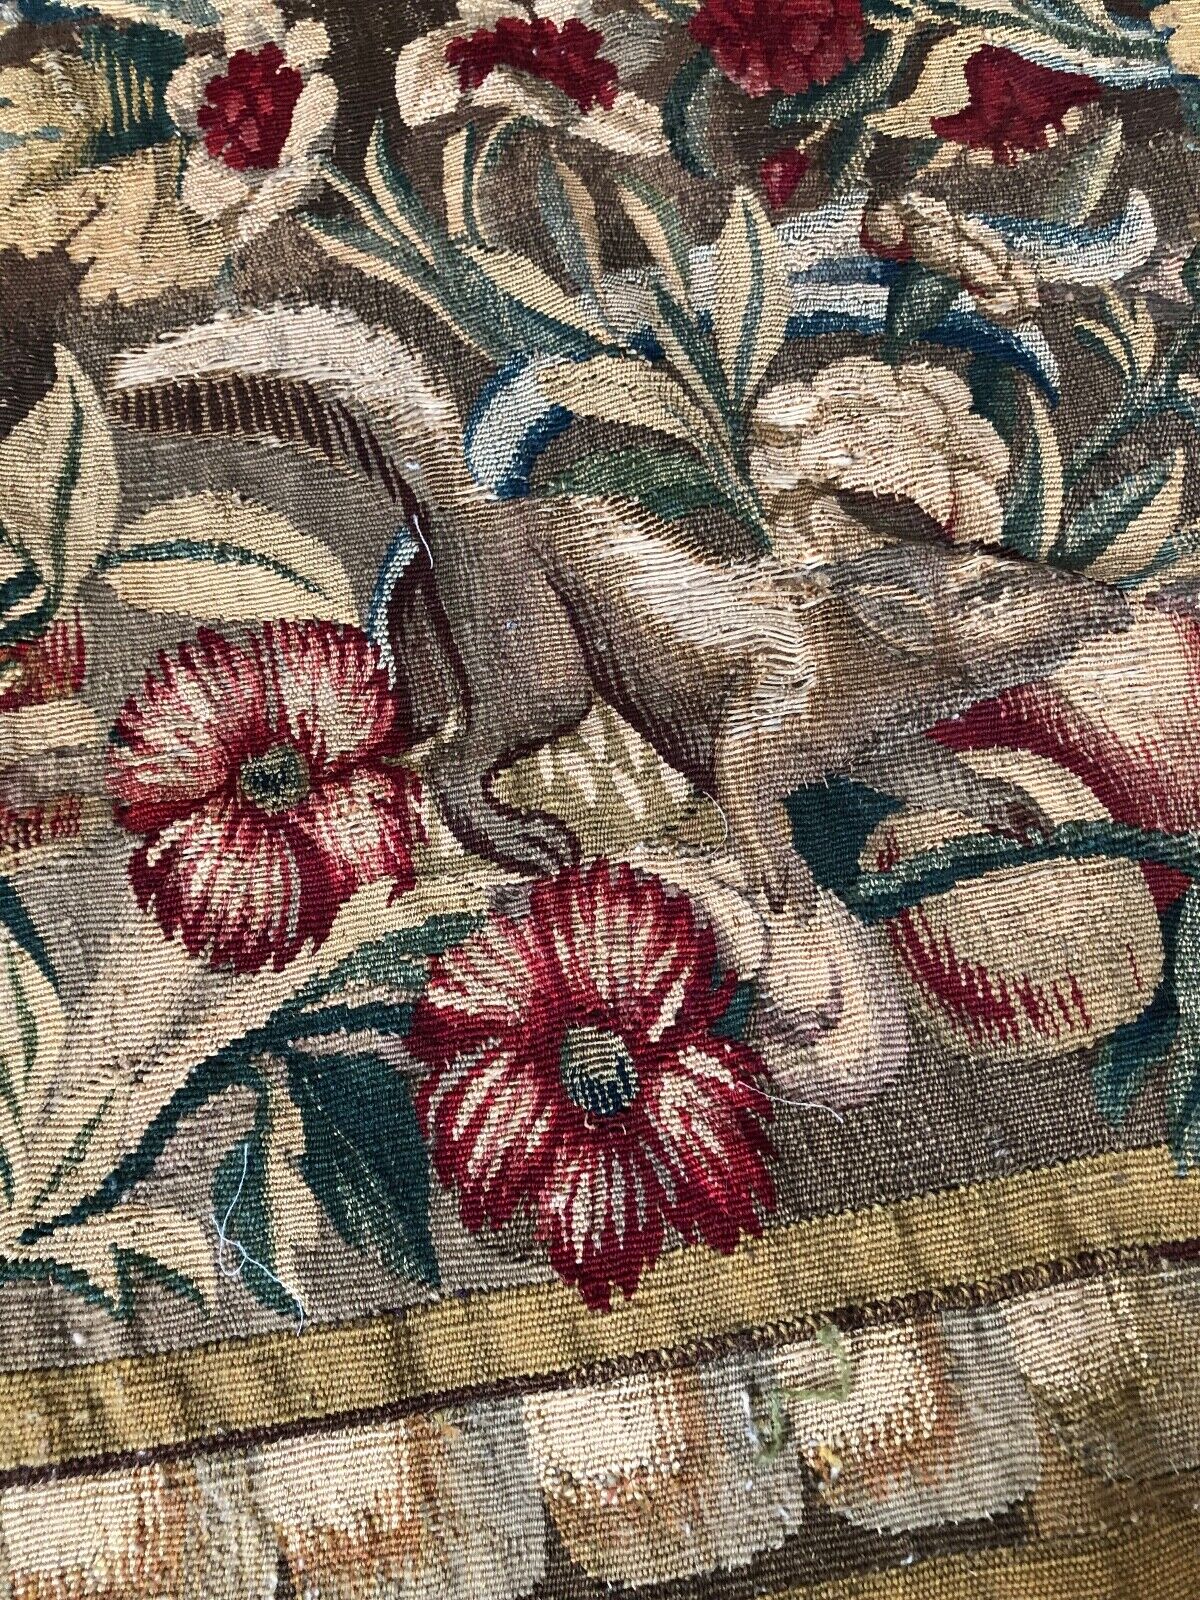 Antique Aubusson tapestry with floral design and squirrel; 2 pieces plus border